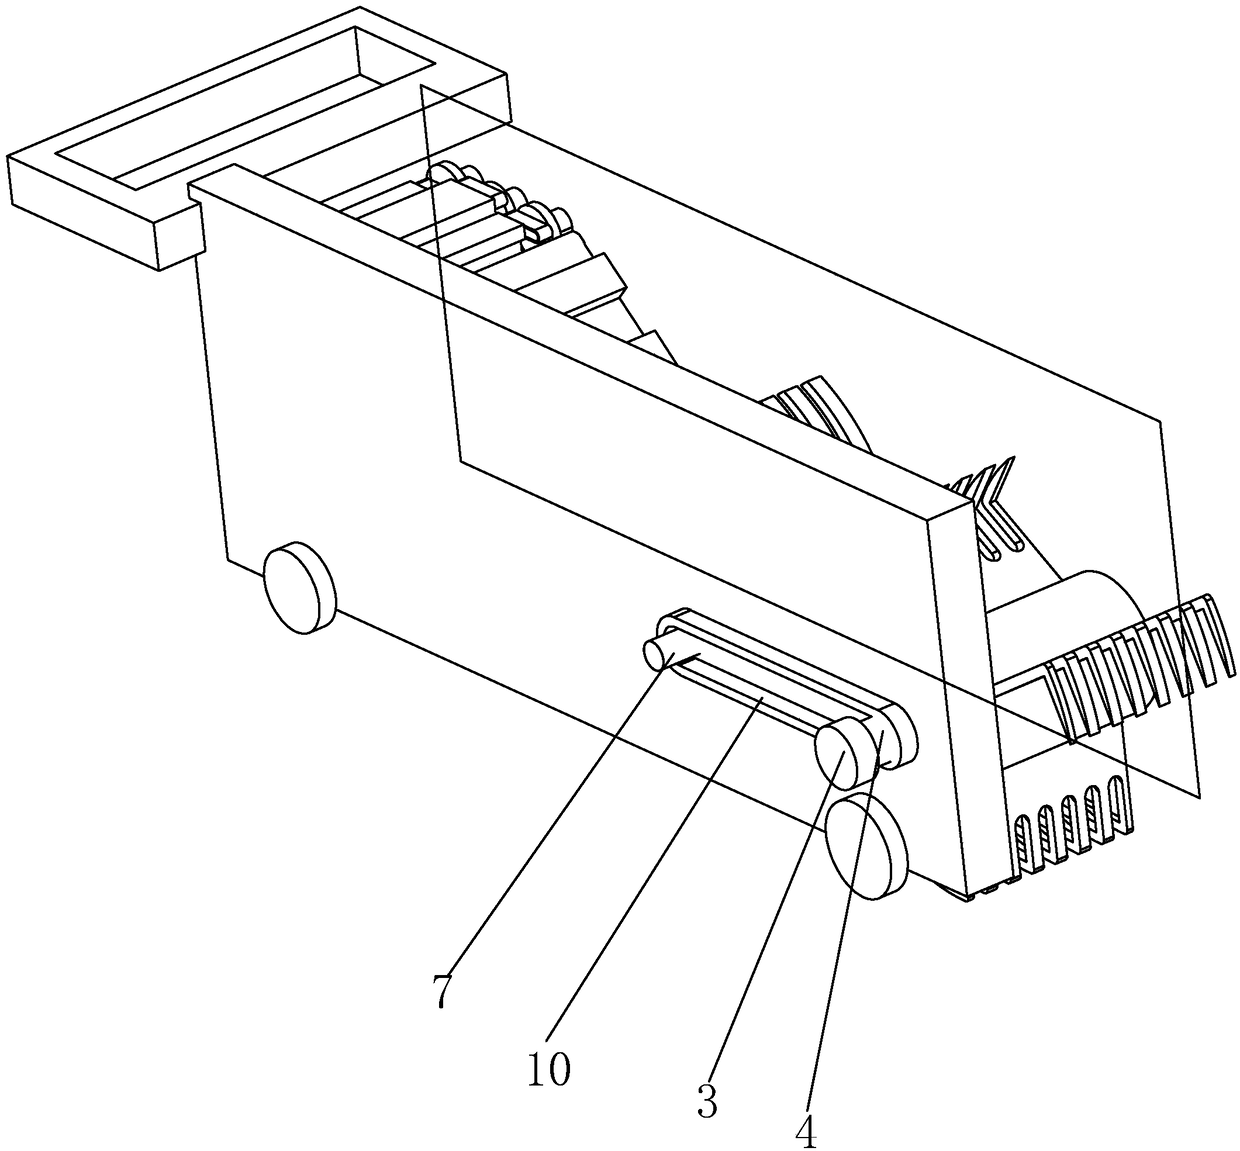 Feed forming device capable of collecting feed while walking and blowing up forage grass